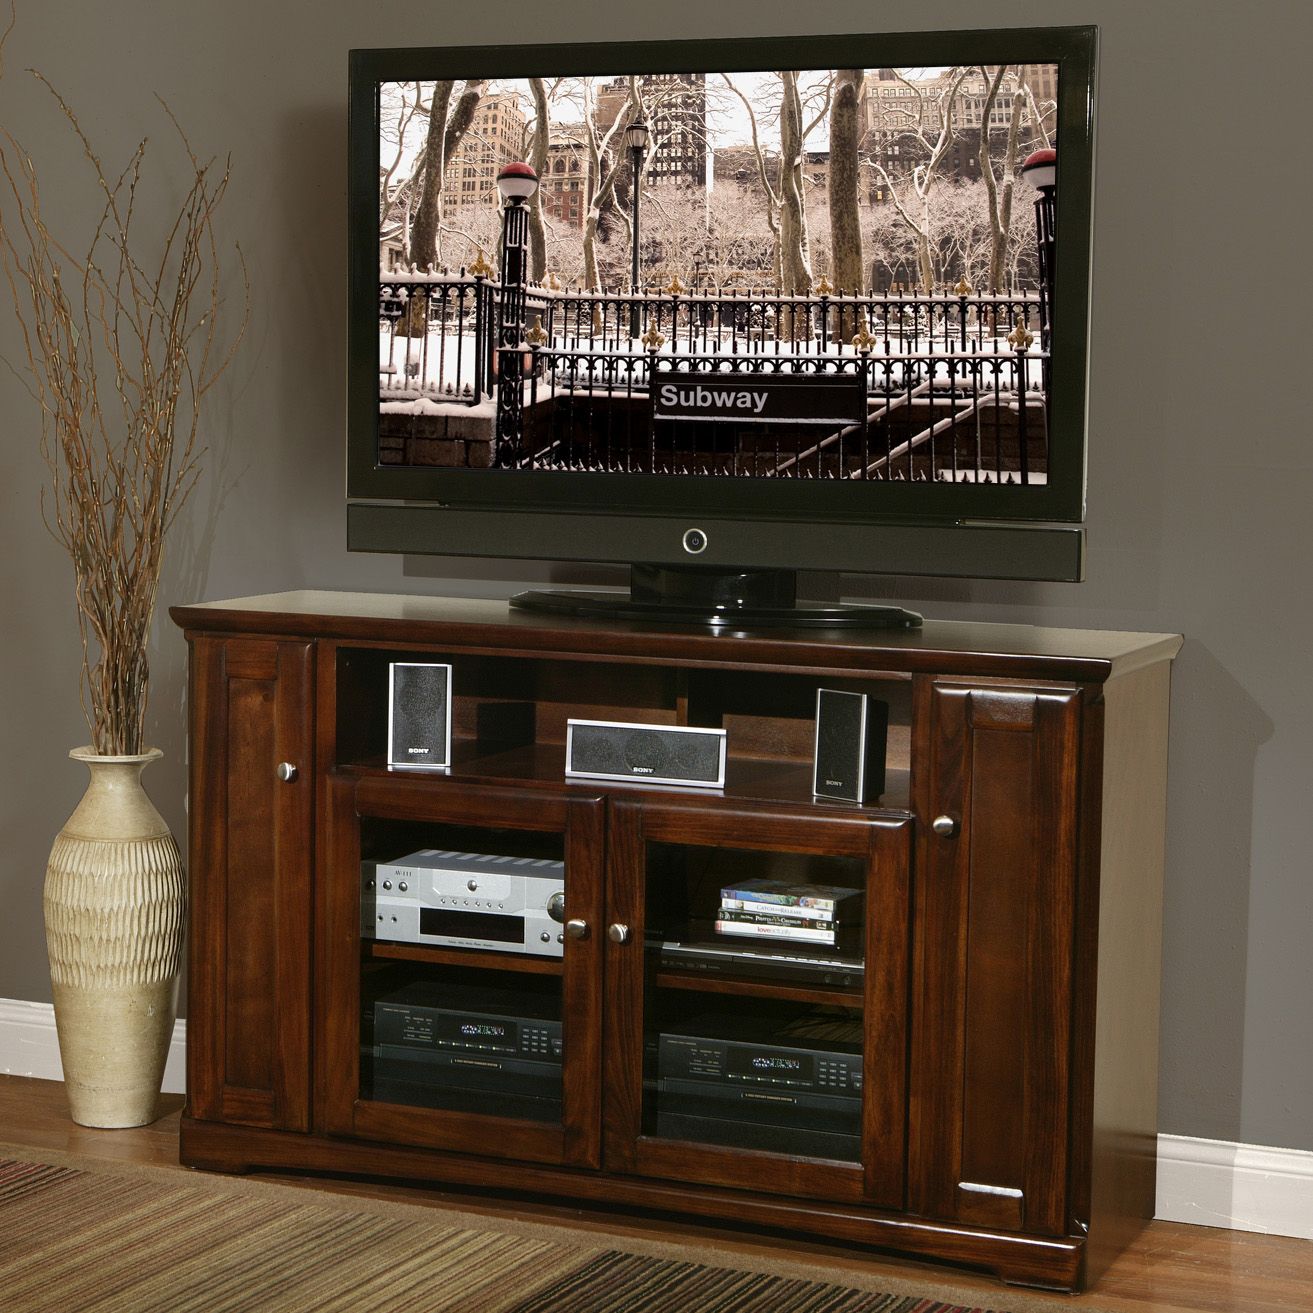 Park View 60 Inch Tv Stand Tallkathy Ireland At Hayneedle Inside Tv Stand Tall Narrow (Gallery 2 of 15)